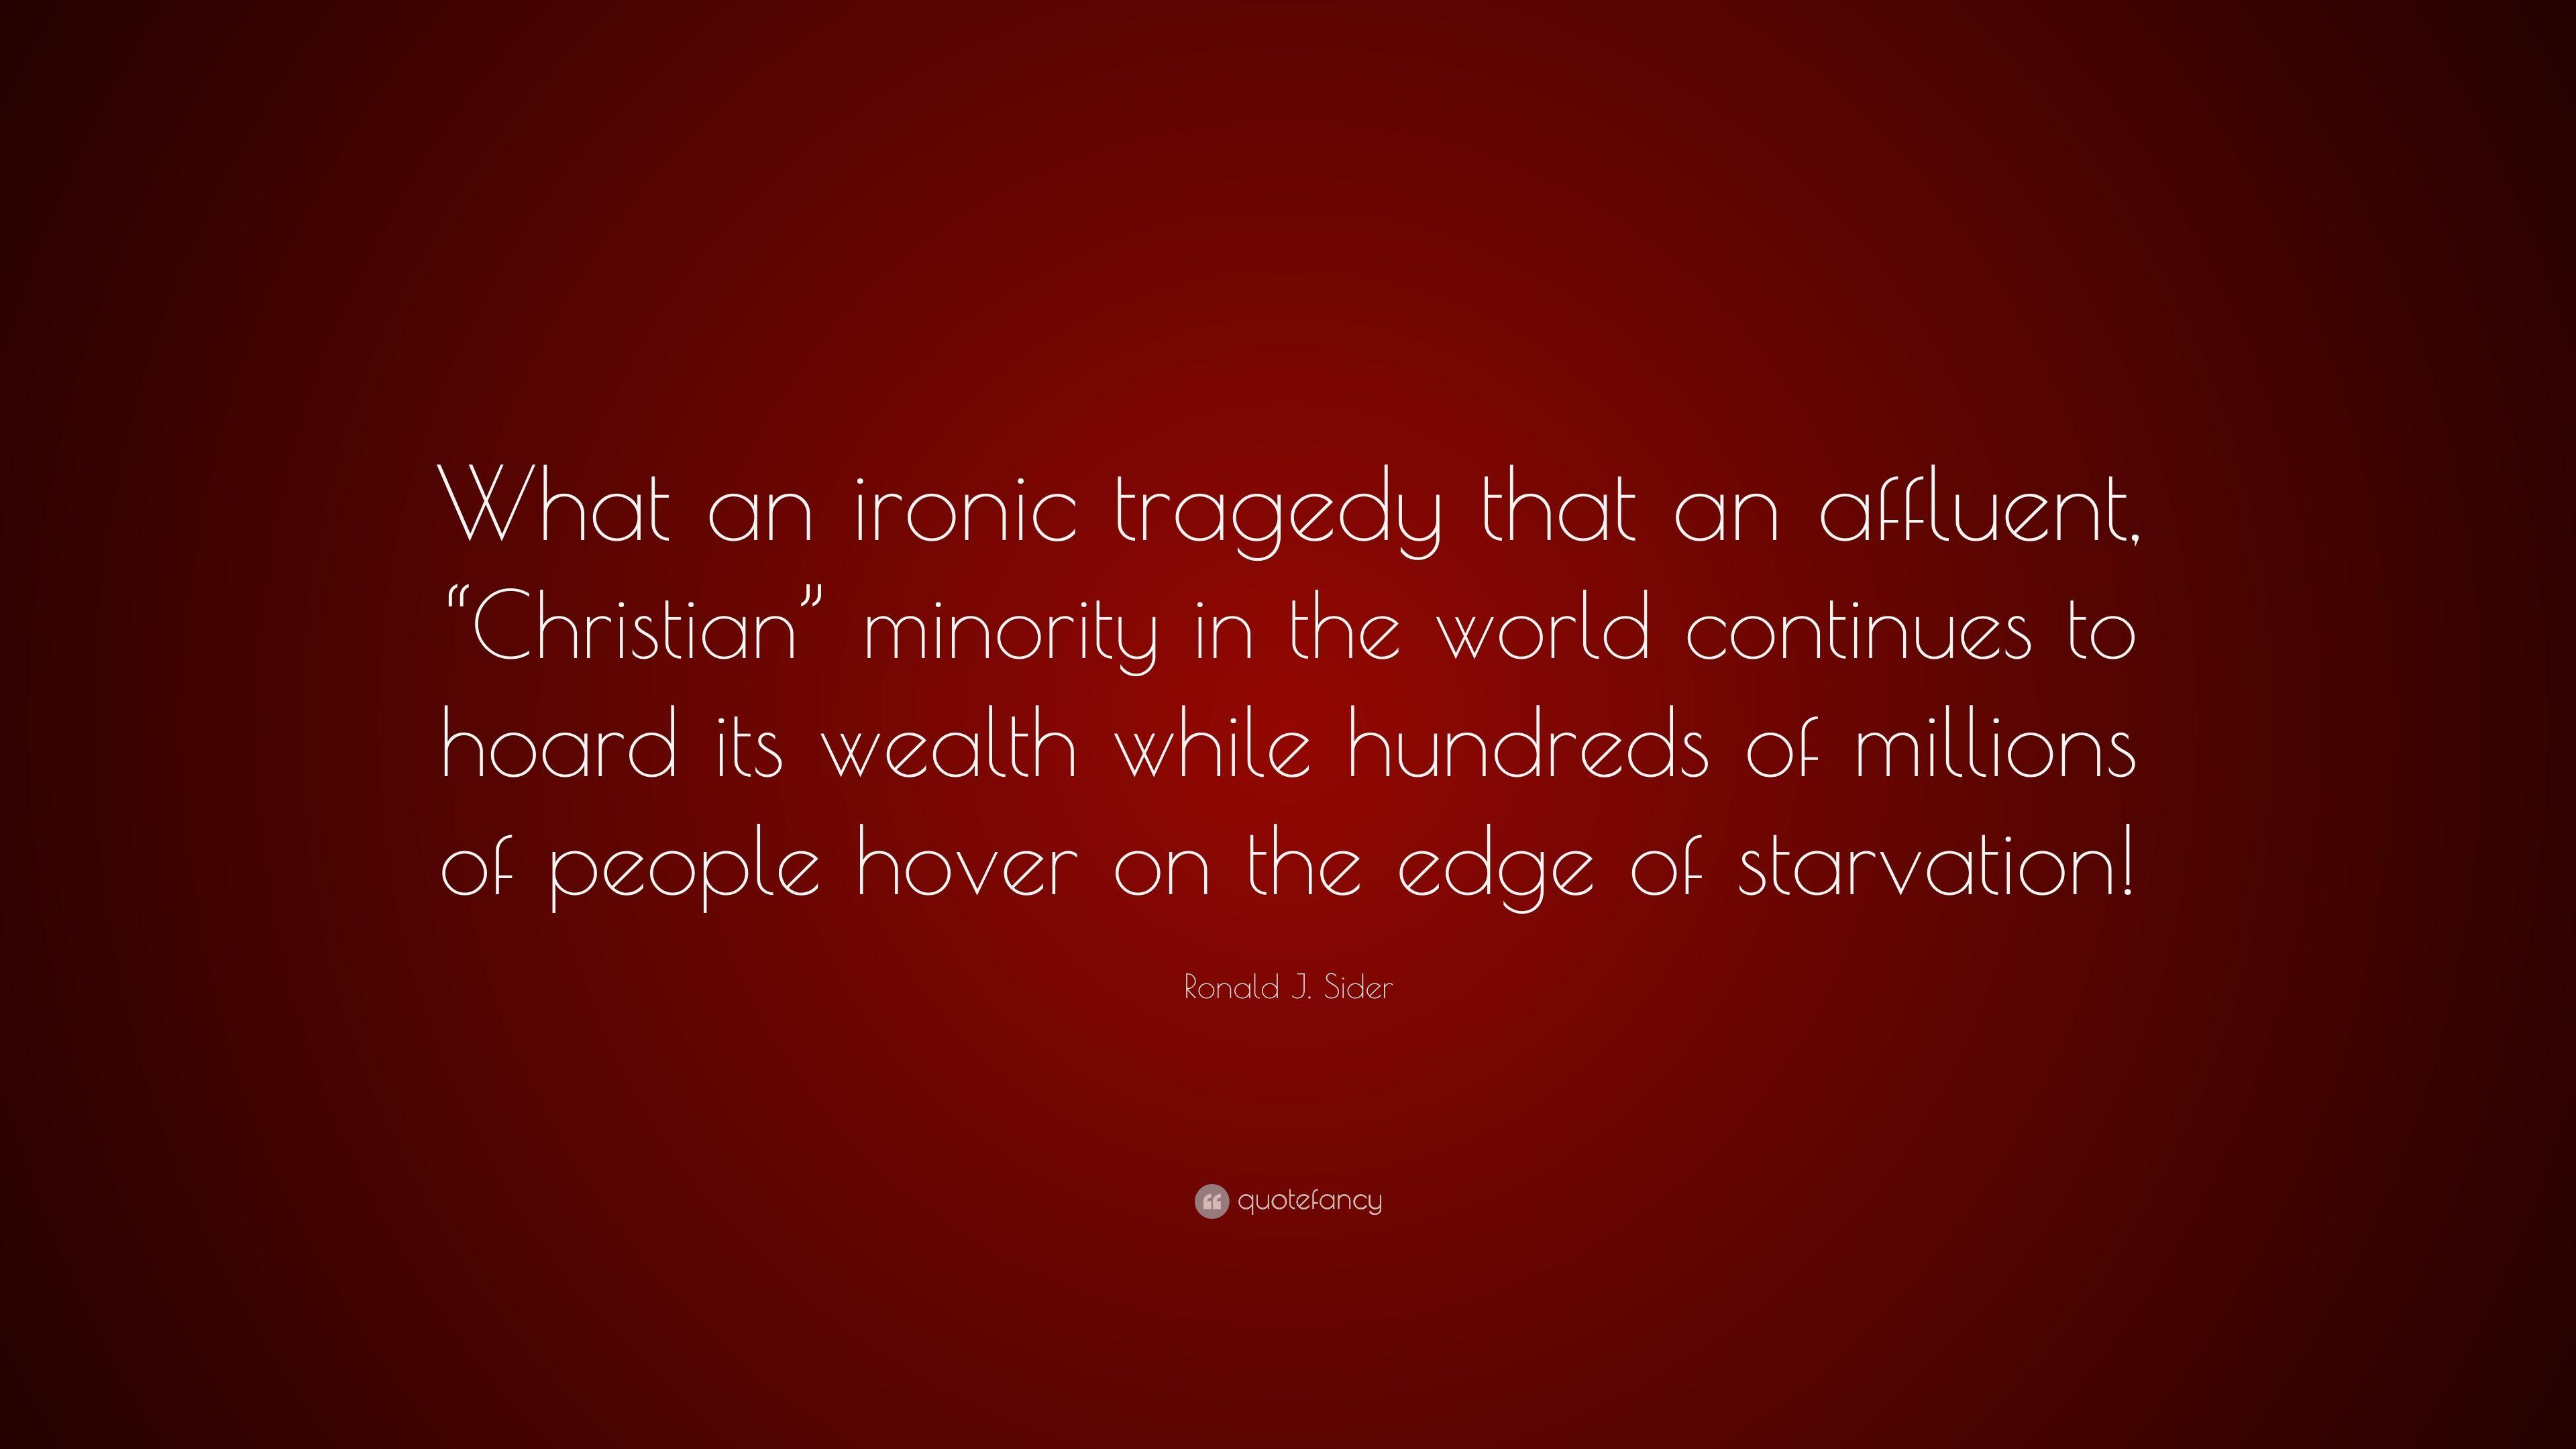 Ronald J. Sider Quote: “What an ironic tragedy that an affluent